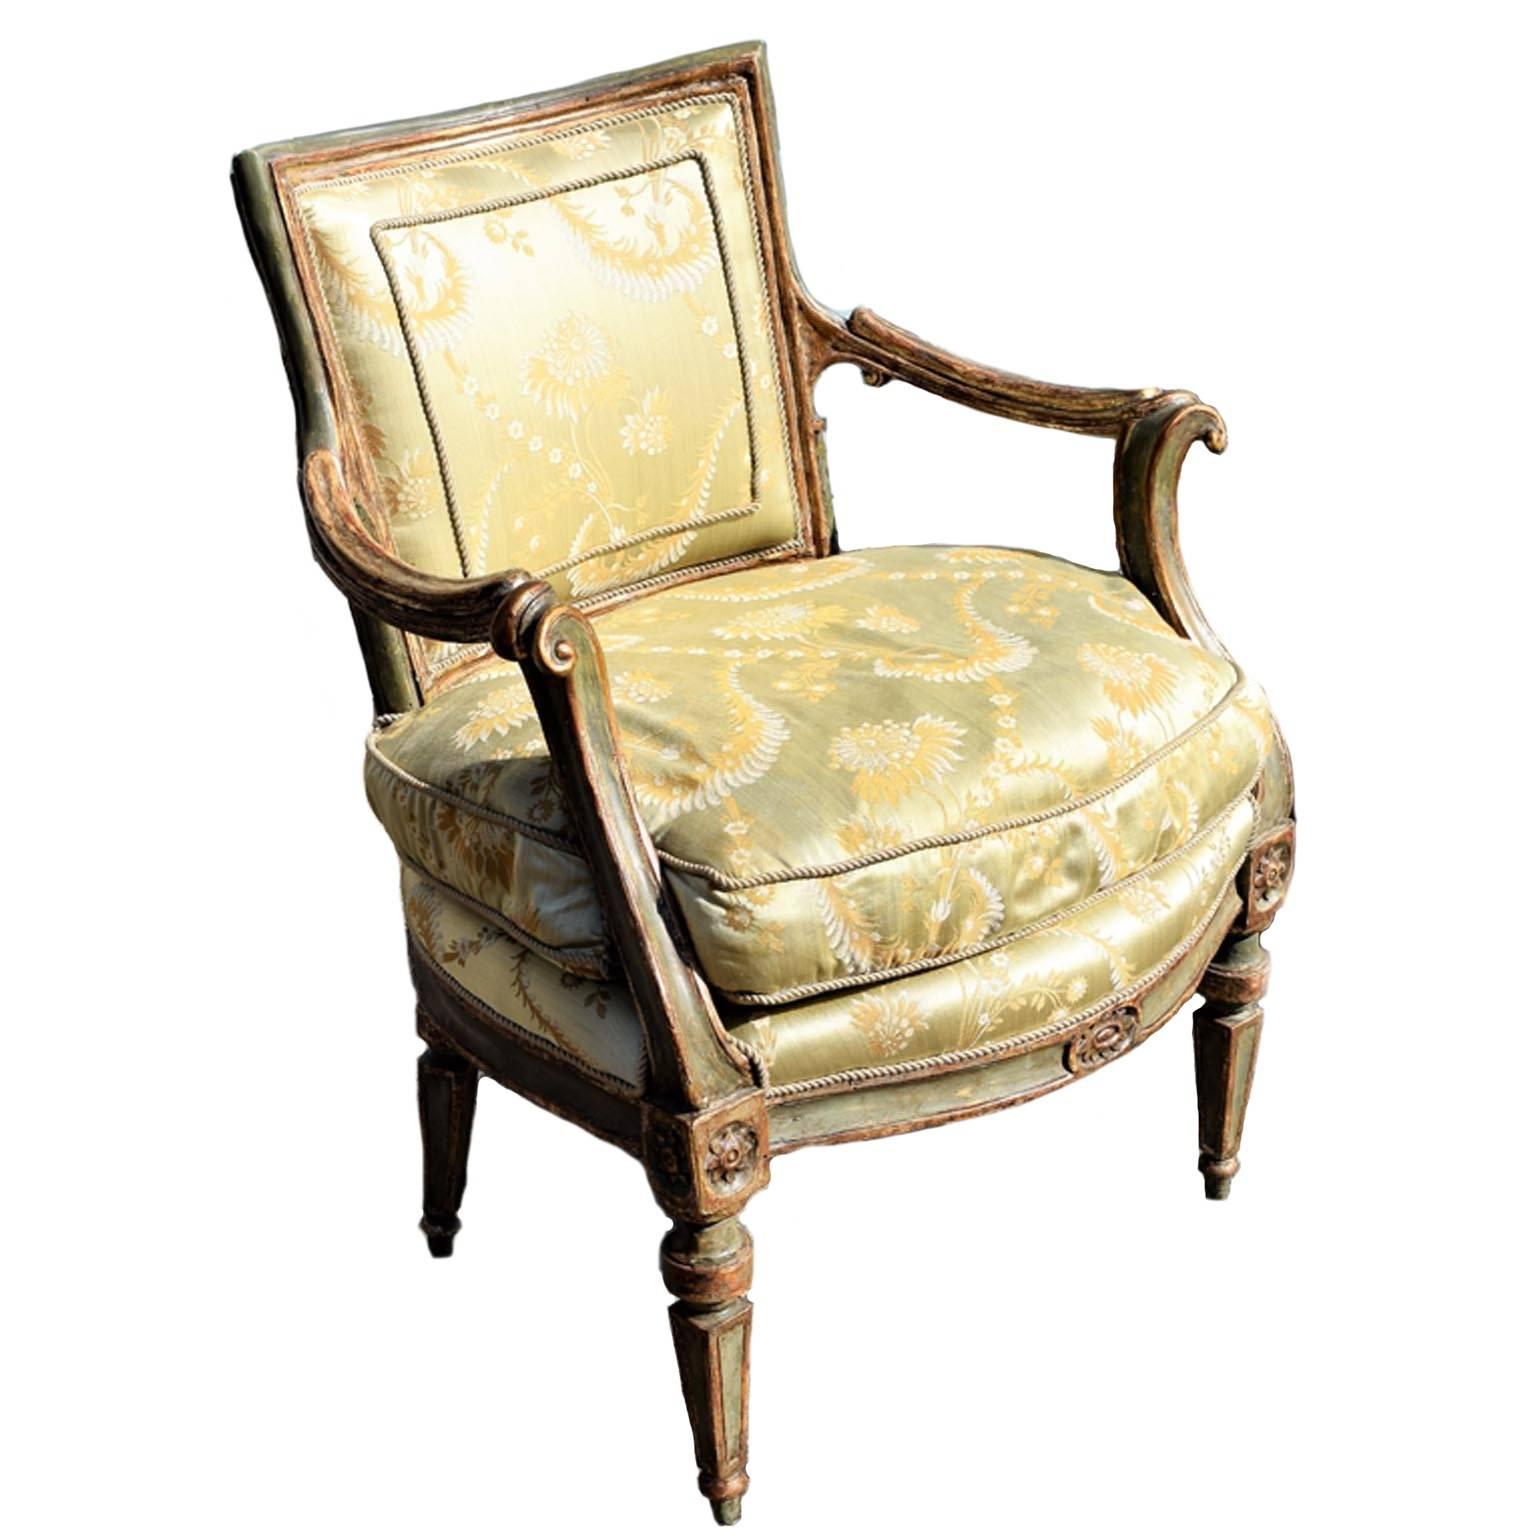 18th Century Venetian Neoclassical Painted and Parcel-Gilt Fauteuil